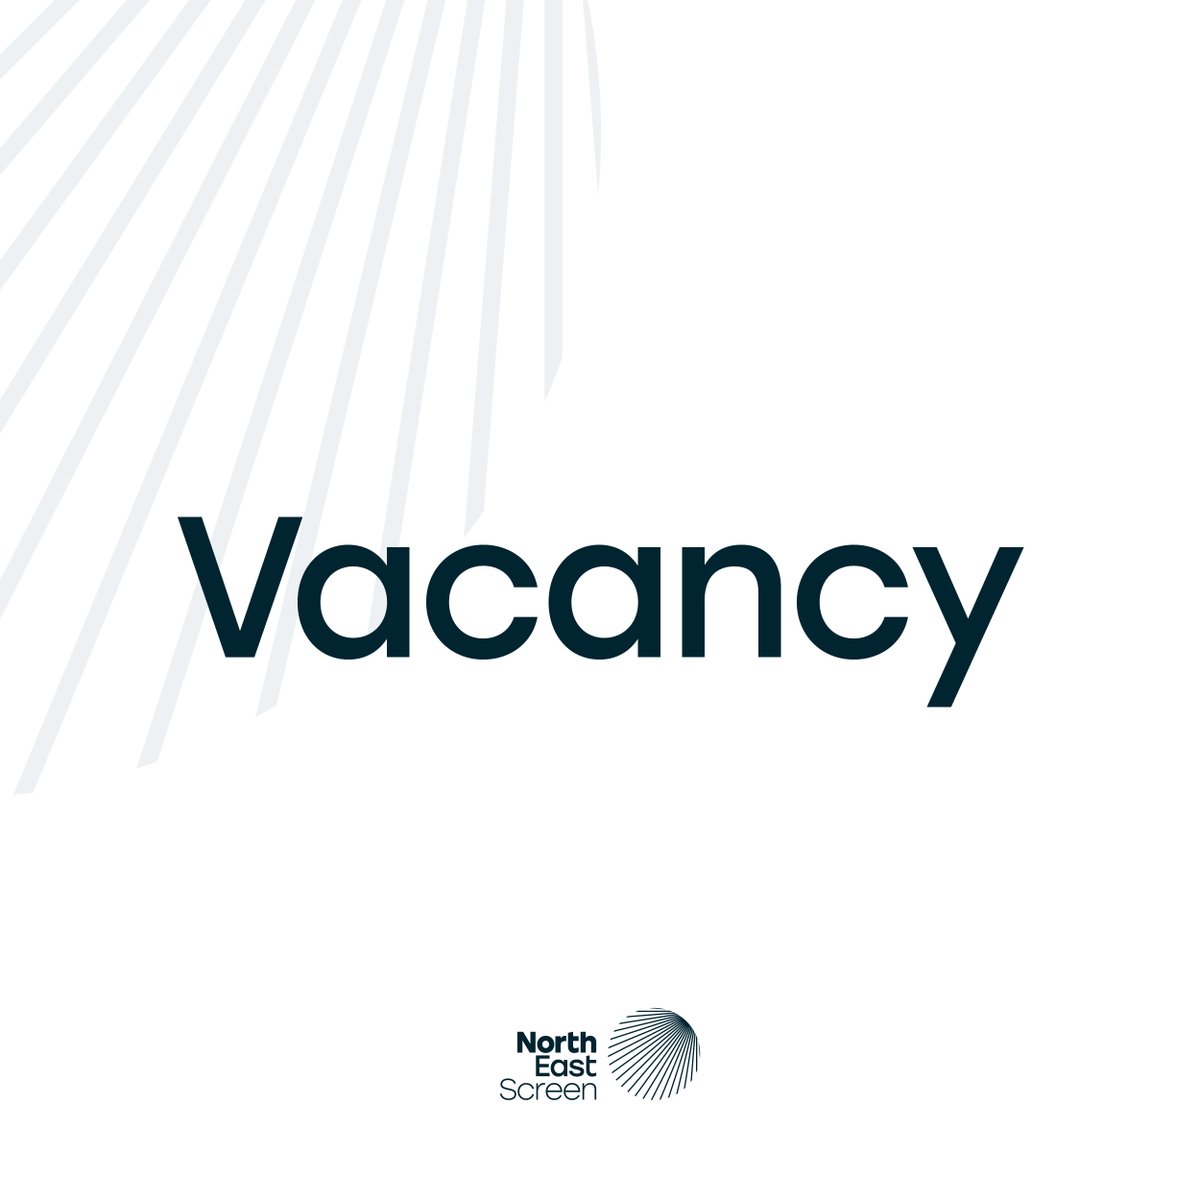 .@TwentySix03 are looking for a Development Researcher to help them create and pitch new ideas to broadcasters and manage the companies social media content. This role is a fixed term contract of 20 weeks with the possibility to extend. Deadline: May 31st bit.ly/3UIg76S